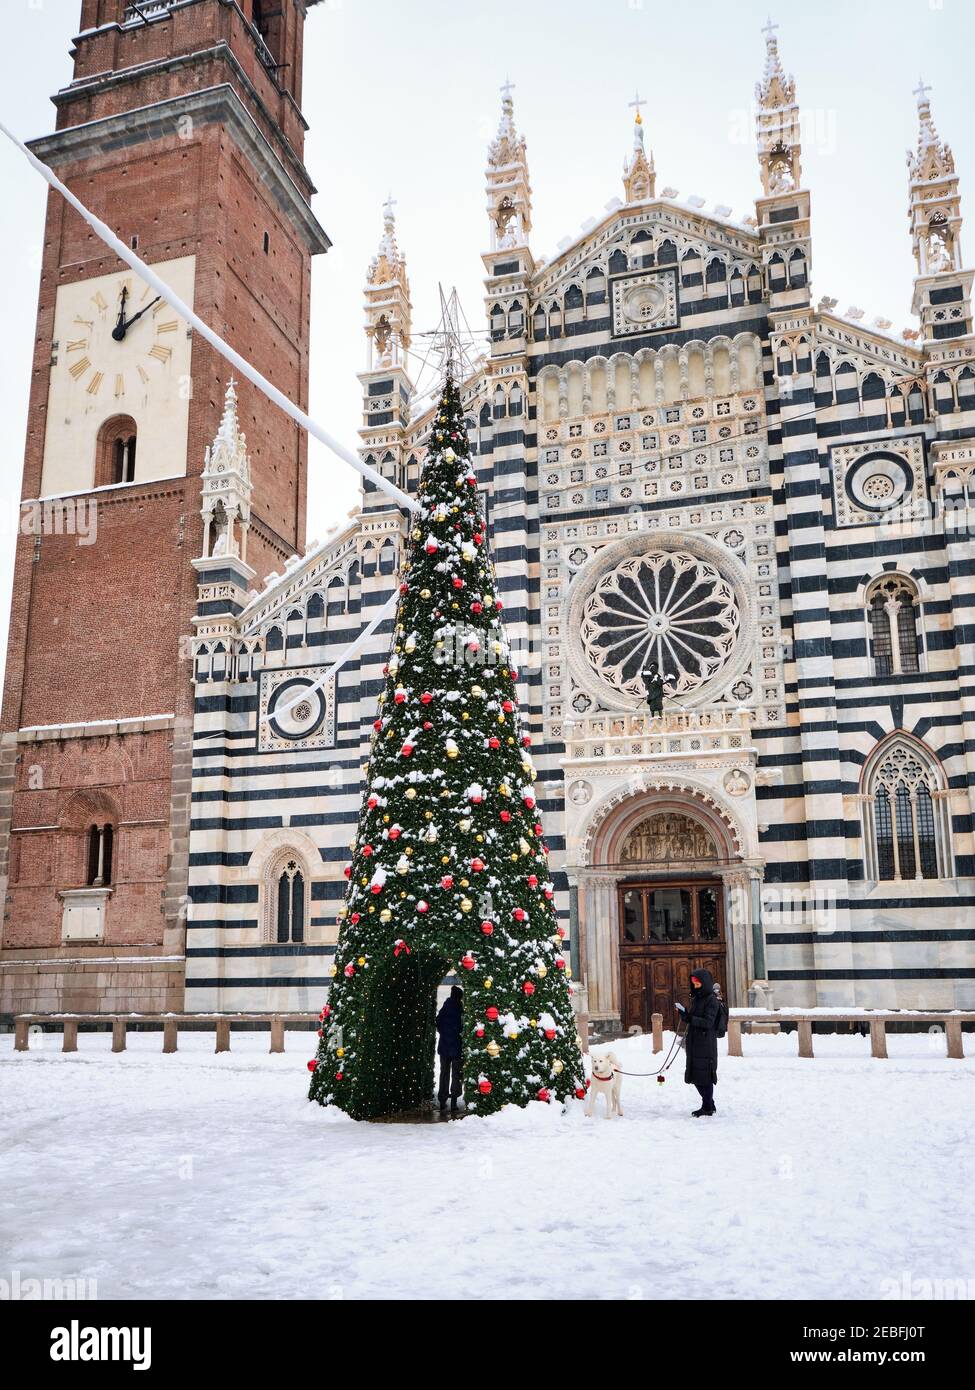 Monza Cathedral (Duomo di Monza)  covered by snow with a Christmas tree in the foreground, Italy, known as the Basilica of San Giovanni Battista. Stock Photo